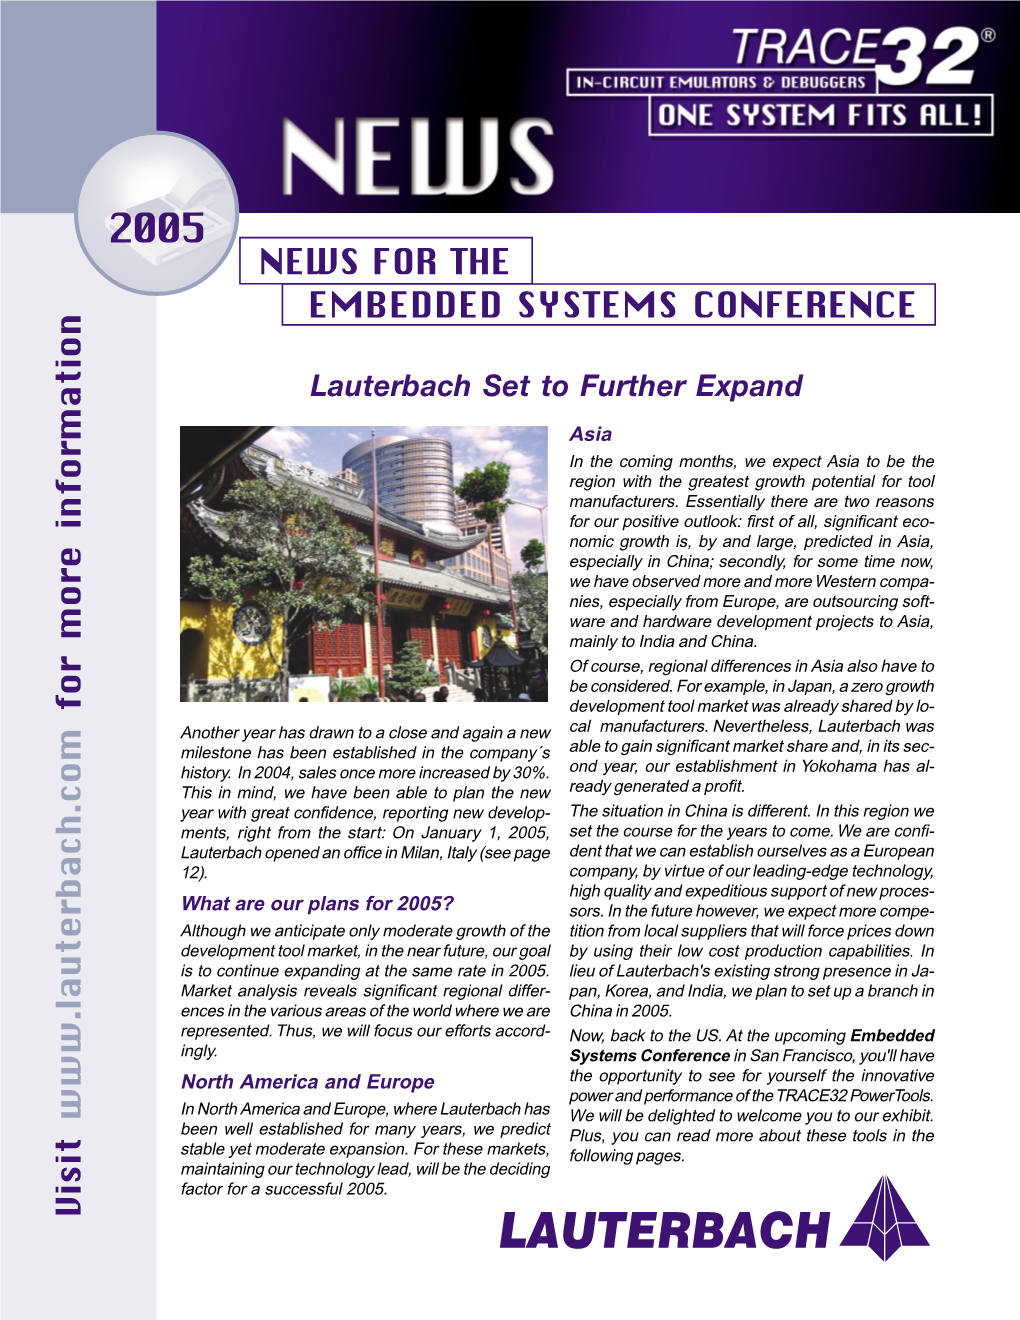 News for the Embedded Systems Conference